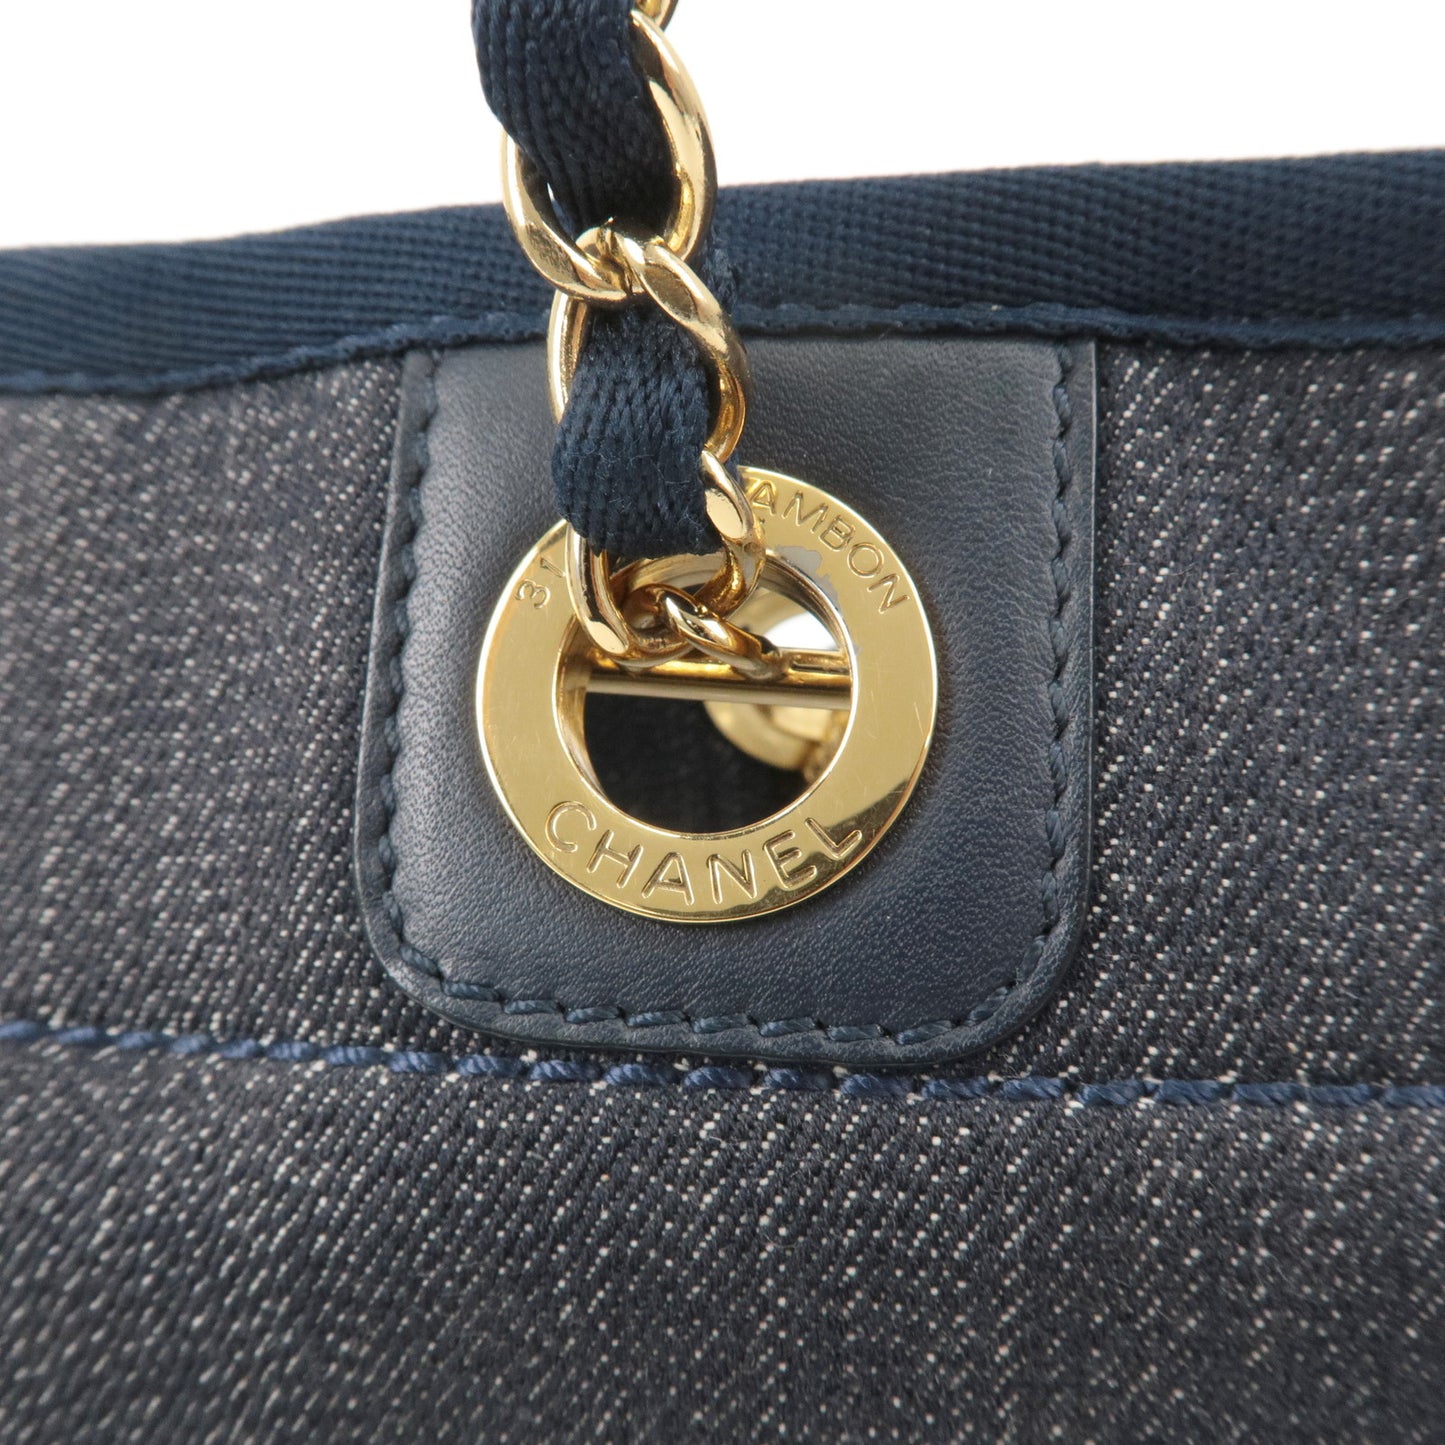 CHANEL Deauville MM Denim Leather Chain Tote Bag Navy A67001